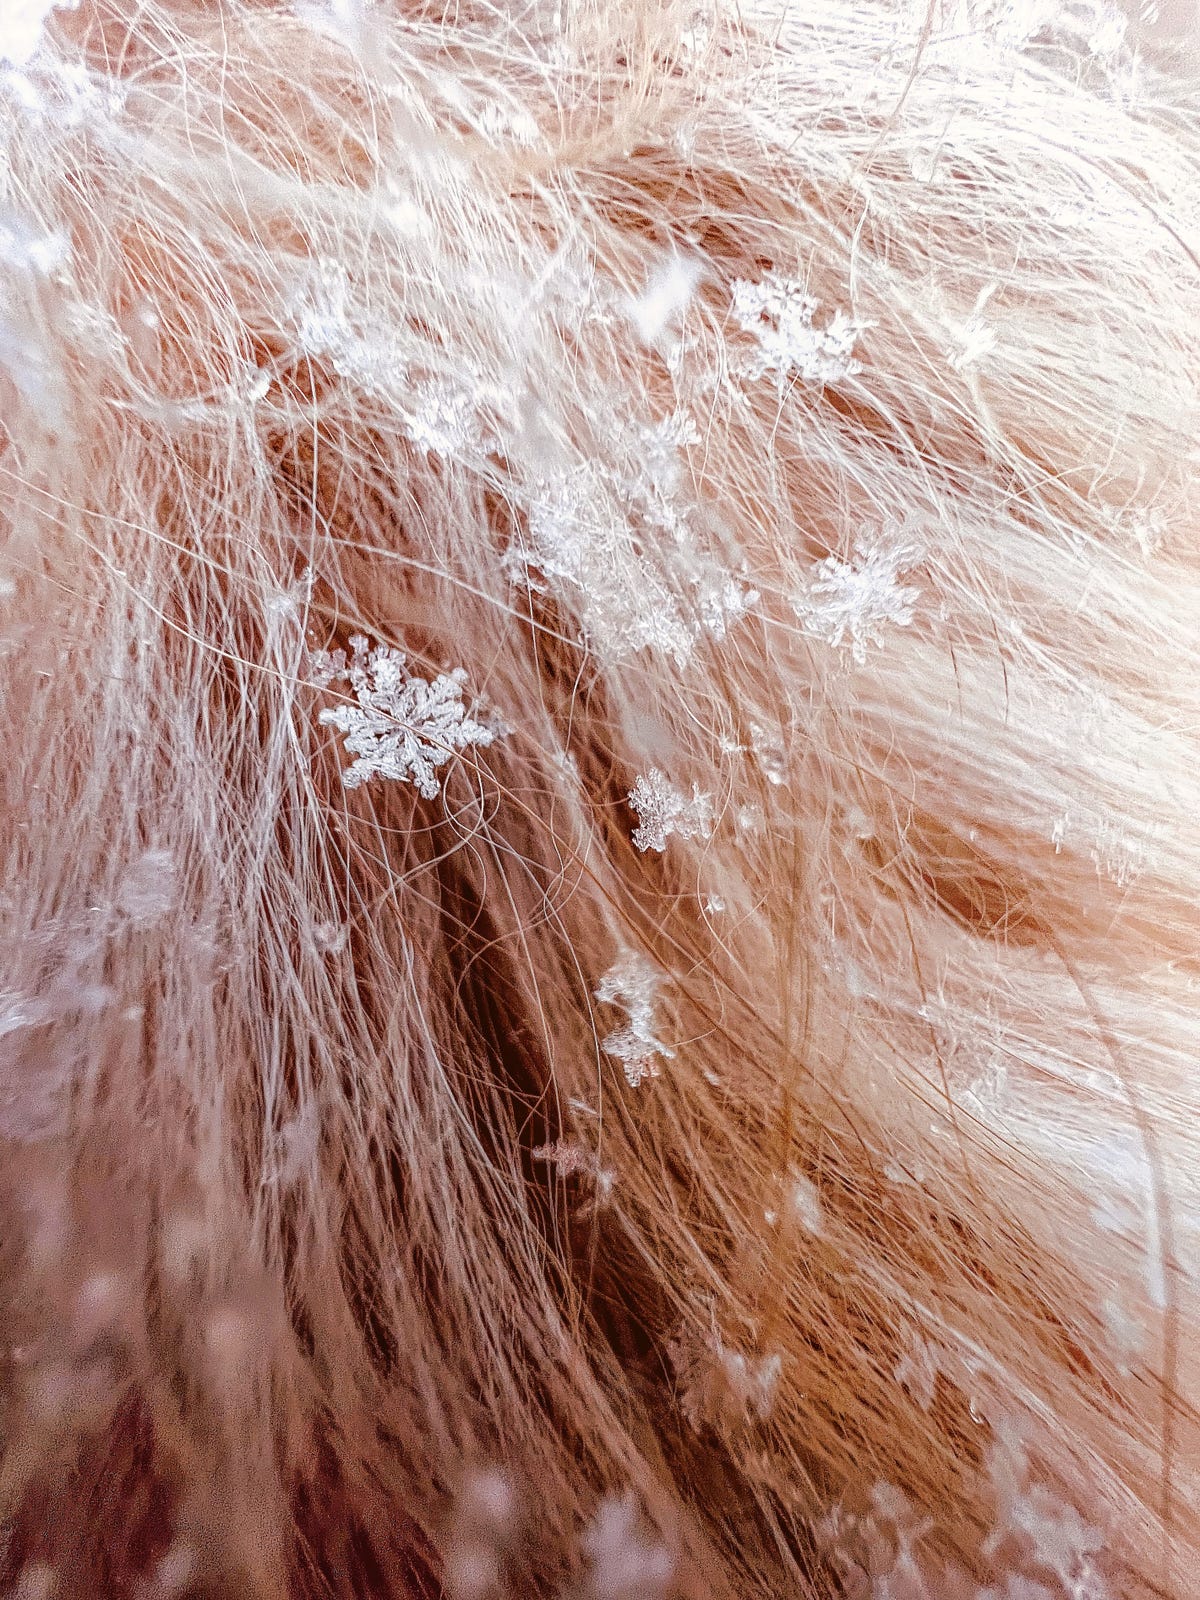 Snowflakes in a dog's fur.